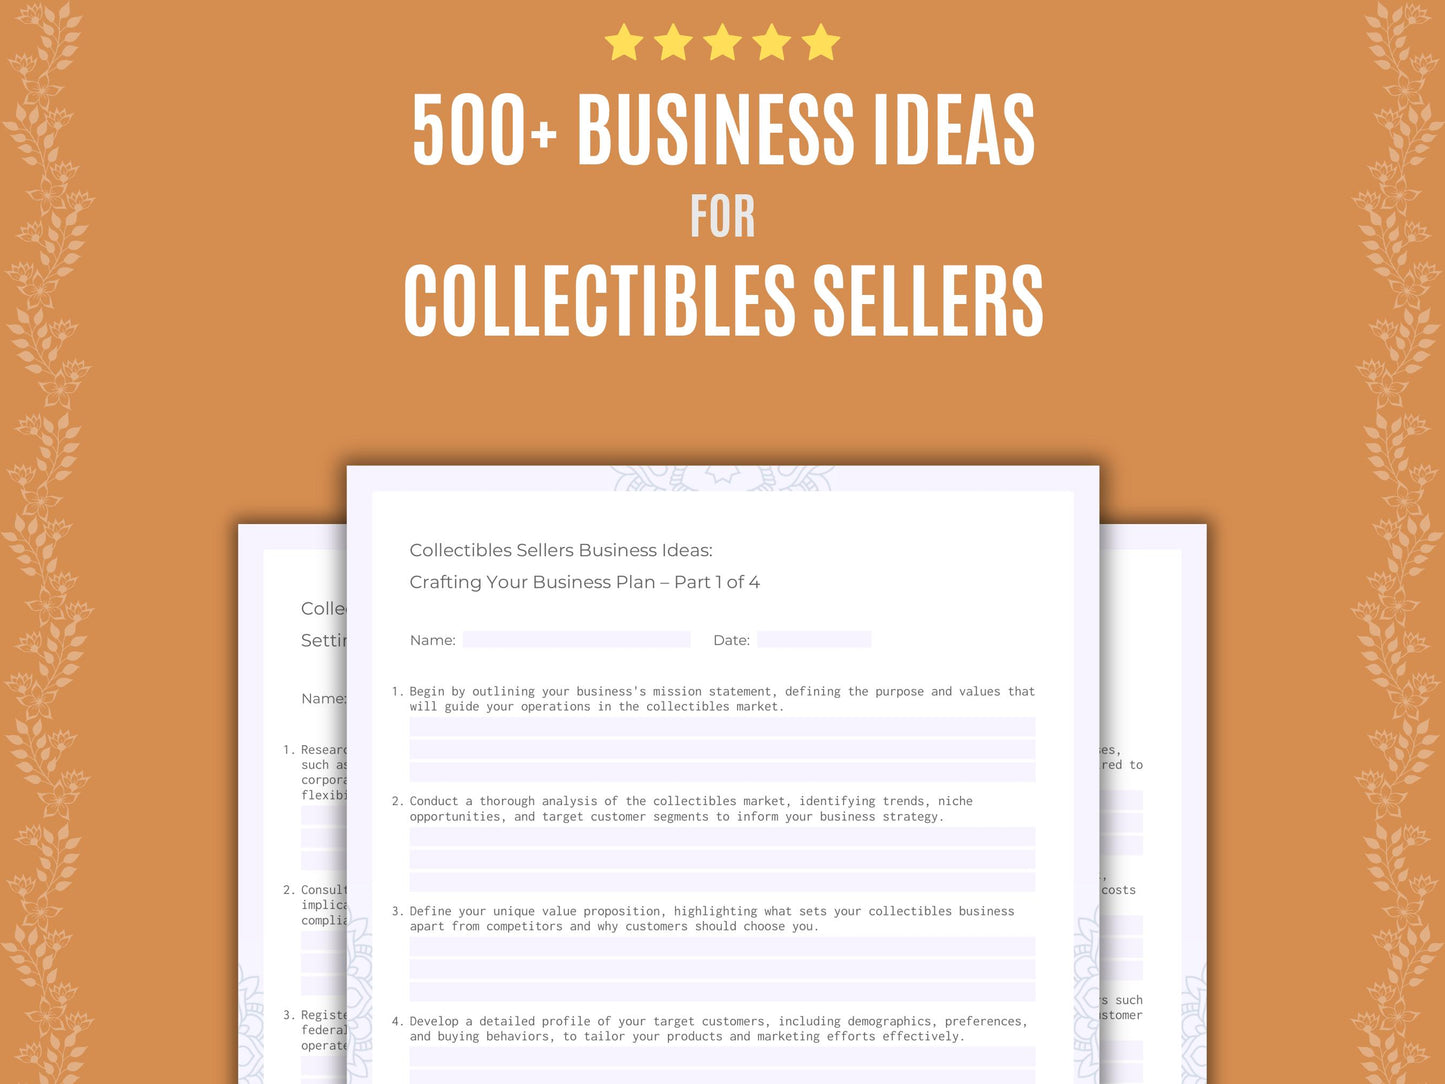 Collectibles Sellers Business Ideas